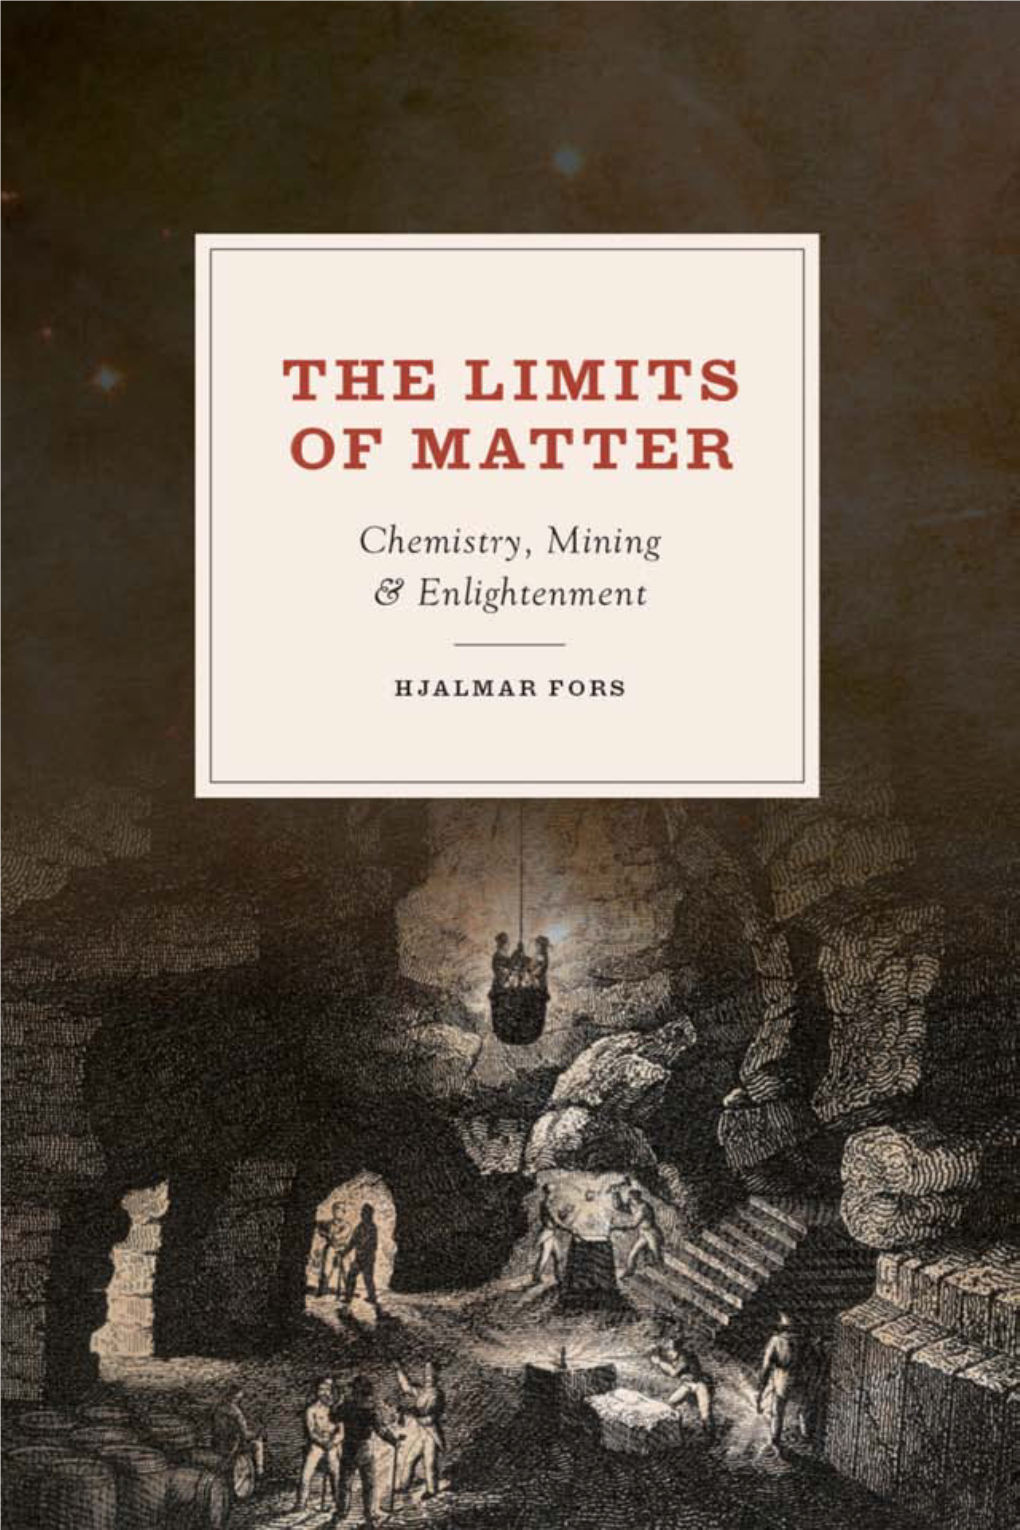 The Limits of Matter a Series in the History of Chemistry, Broadly Construed, Edited by Angela N